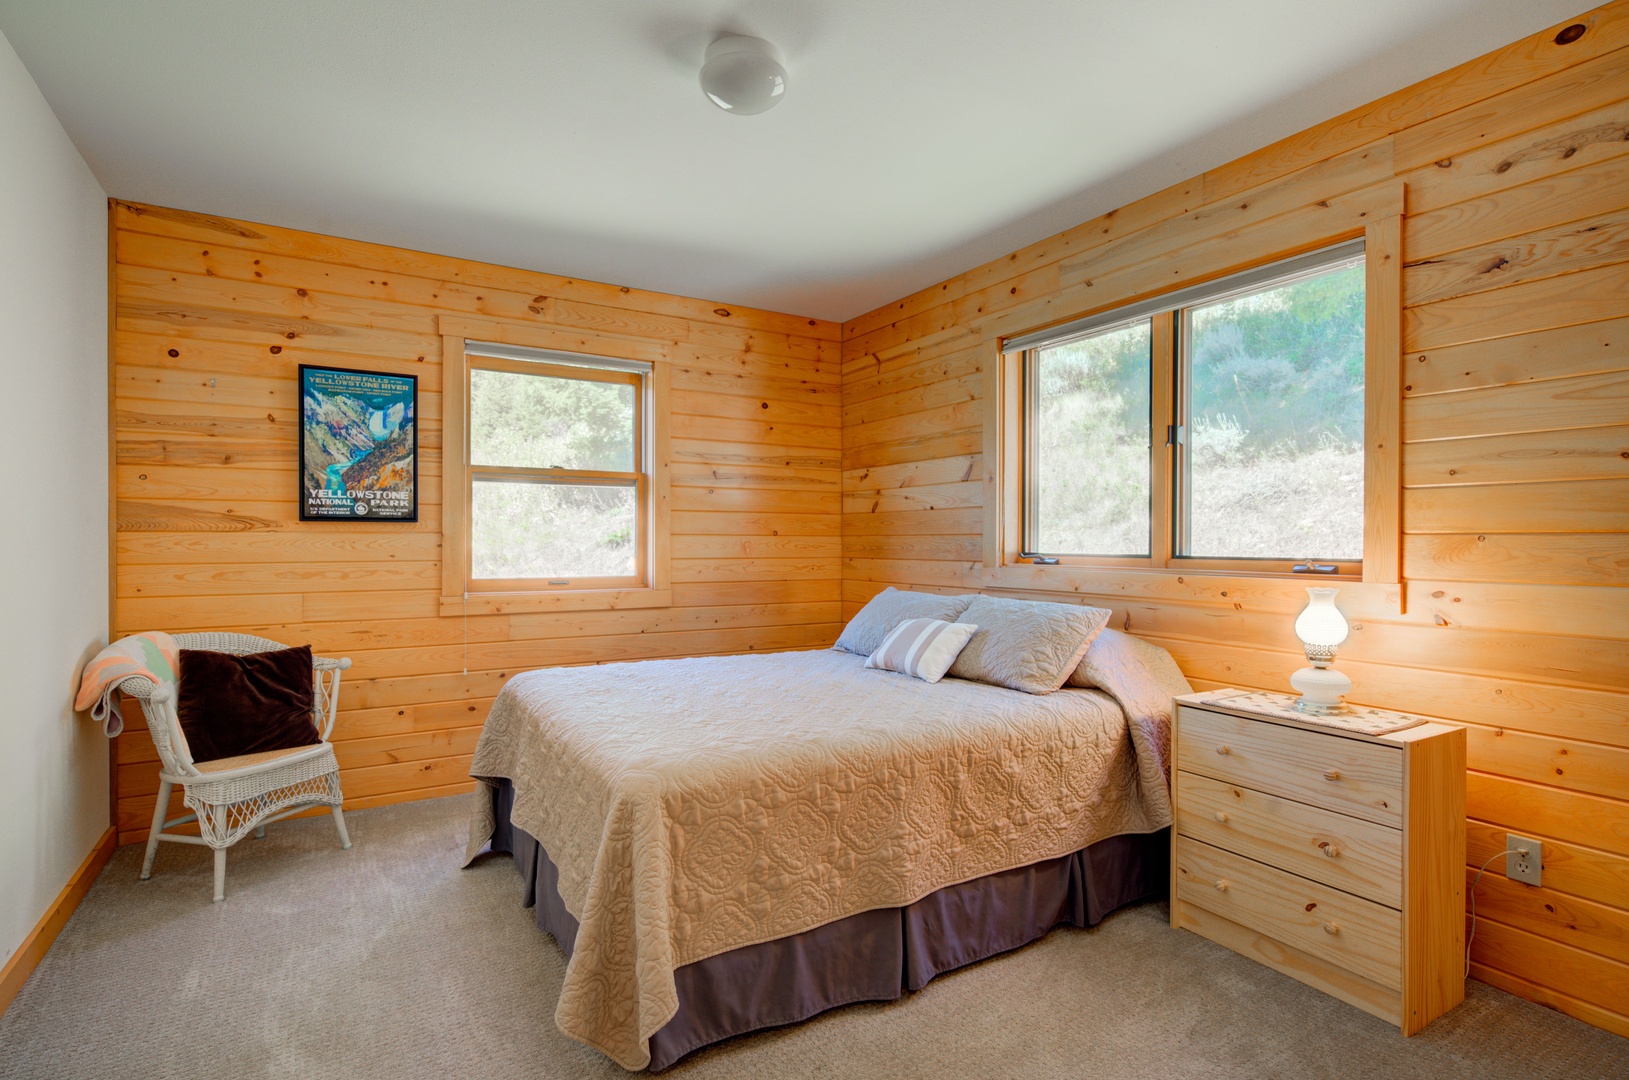 Bozeman Vacation Rentals, The Canyon Lookout - Nature right outside your window